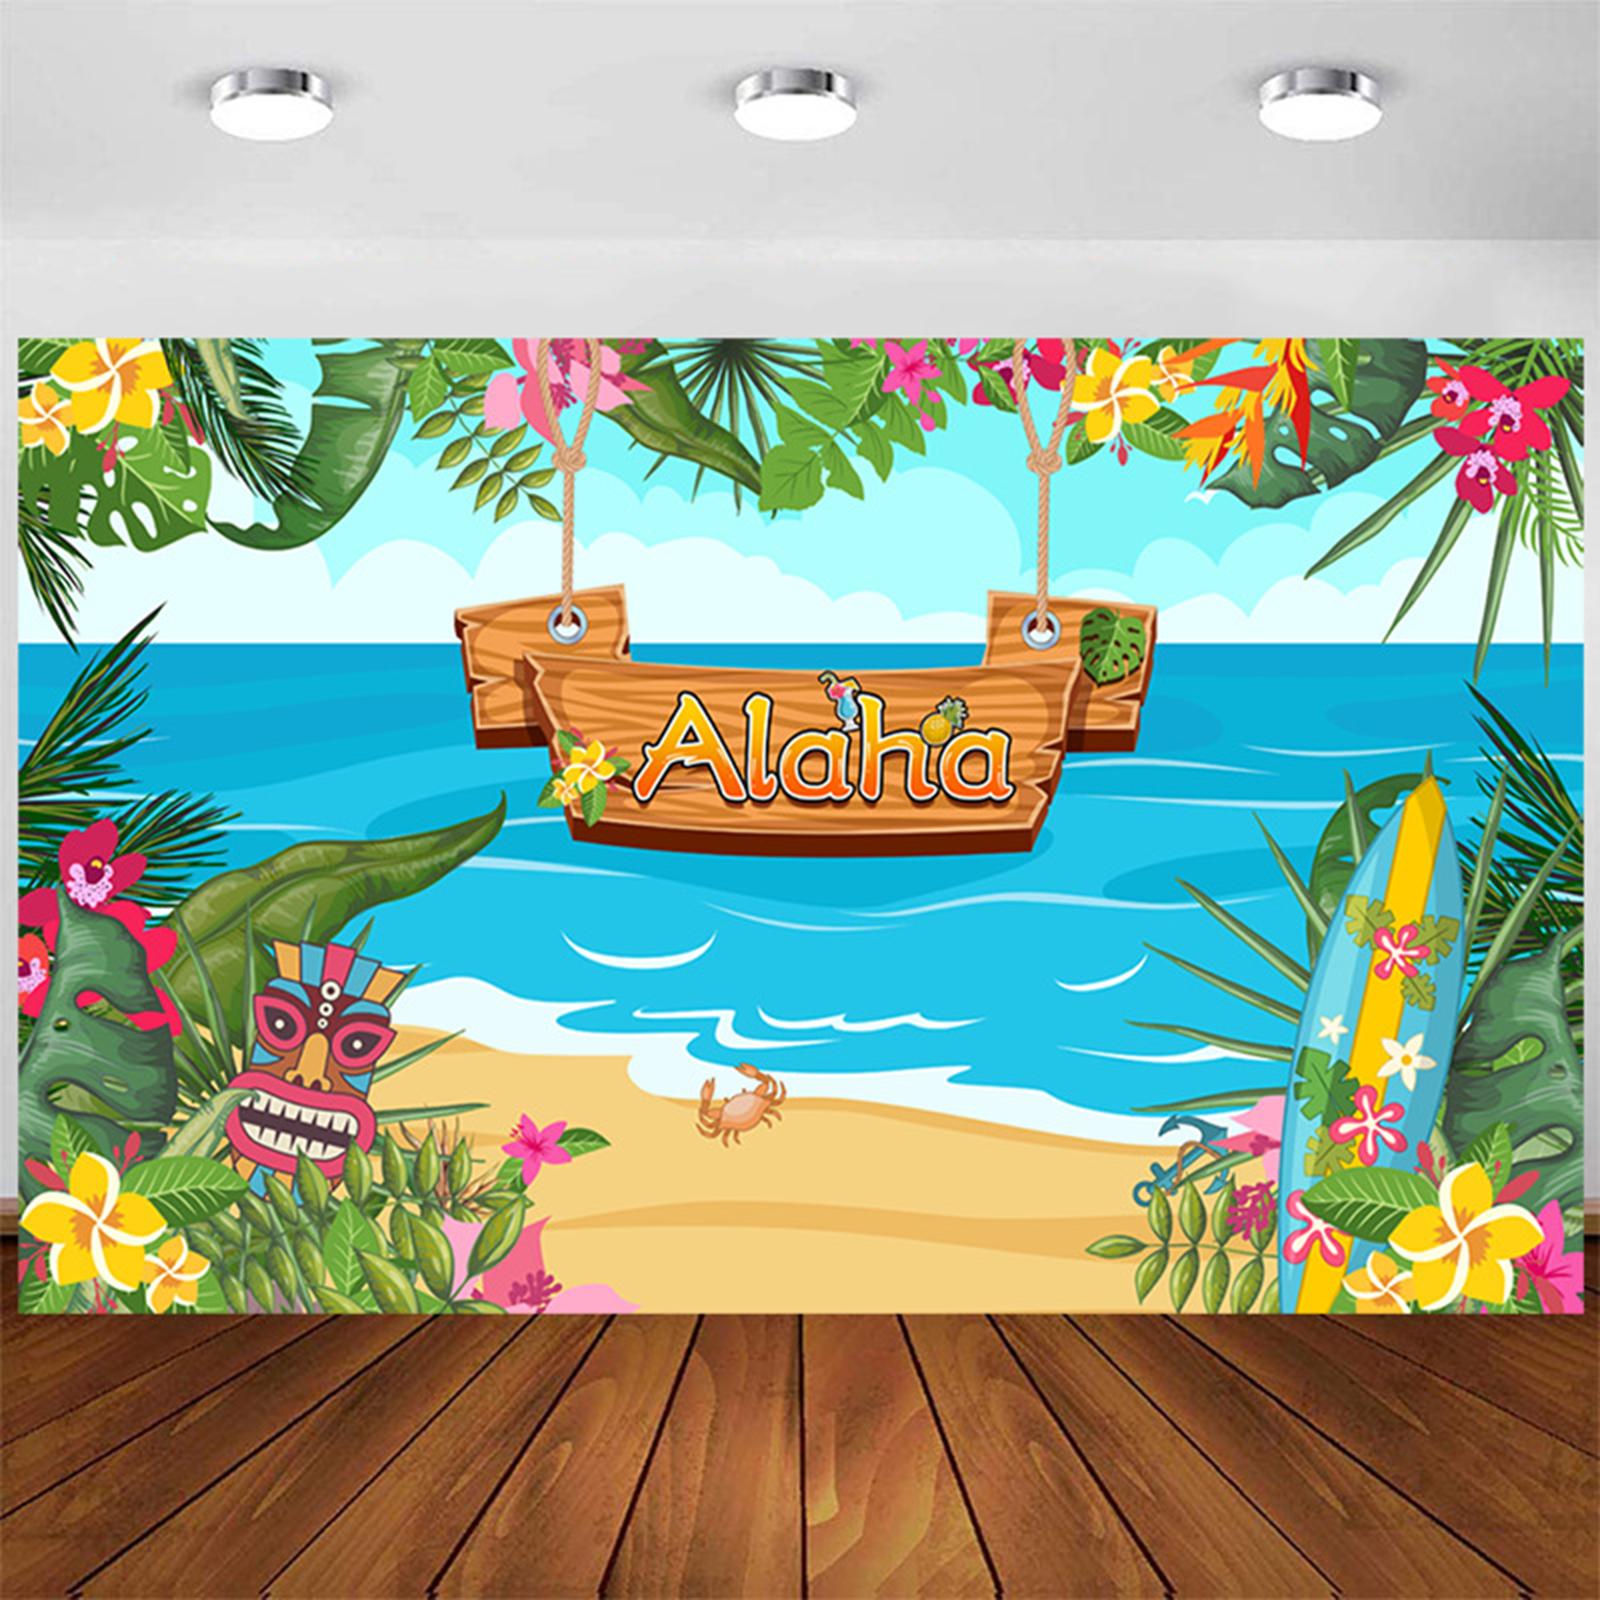 180x110cm Photography Backdrops Tropical Sea Beach Background Waterproof